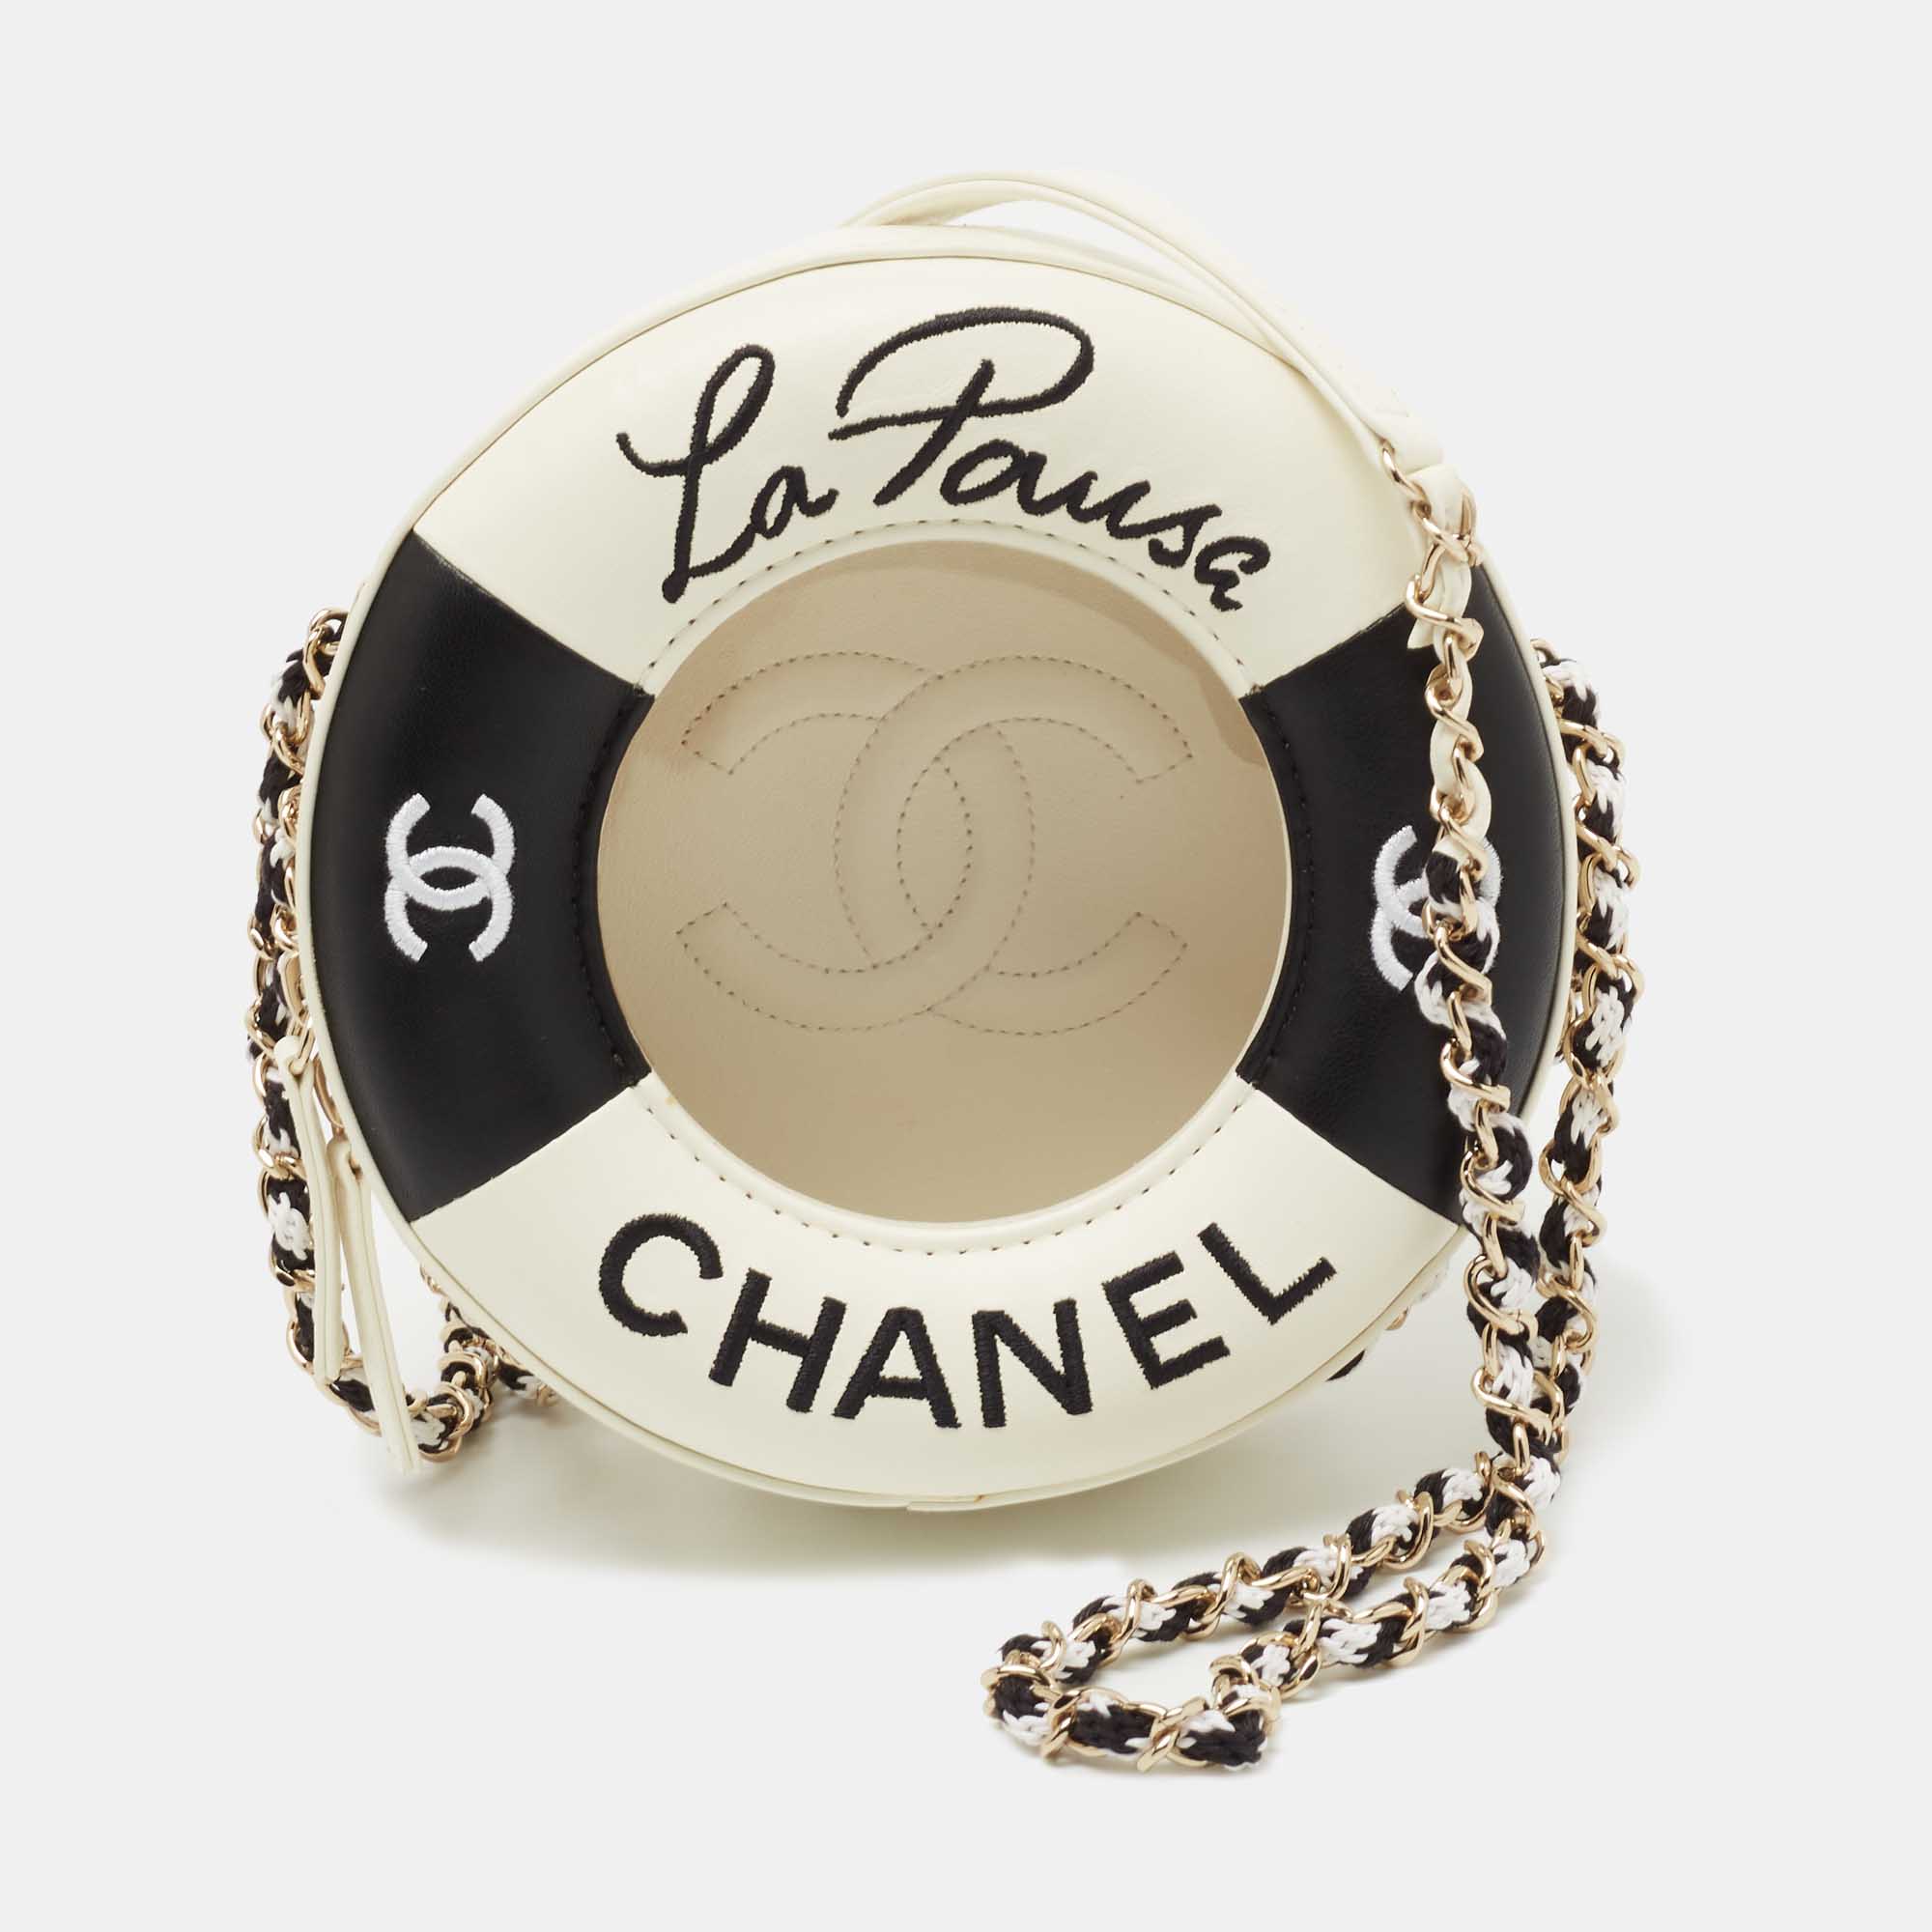 Chanel Lambskin Coco Lifesaver Round Bag Black - One Color